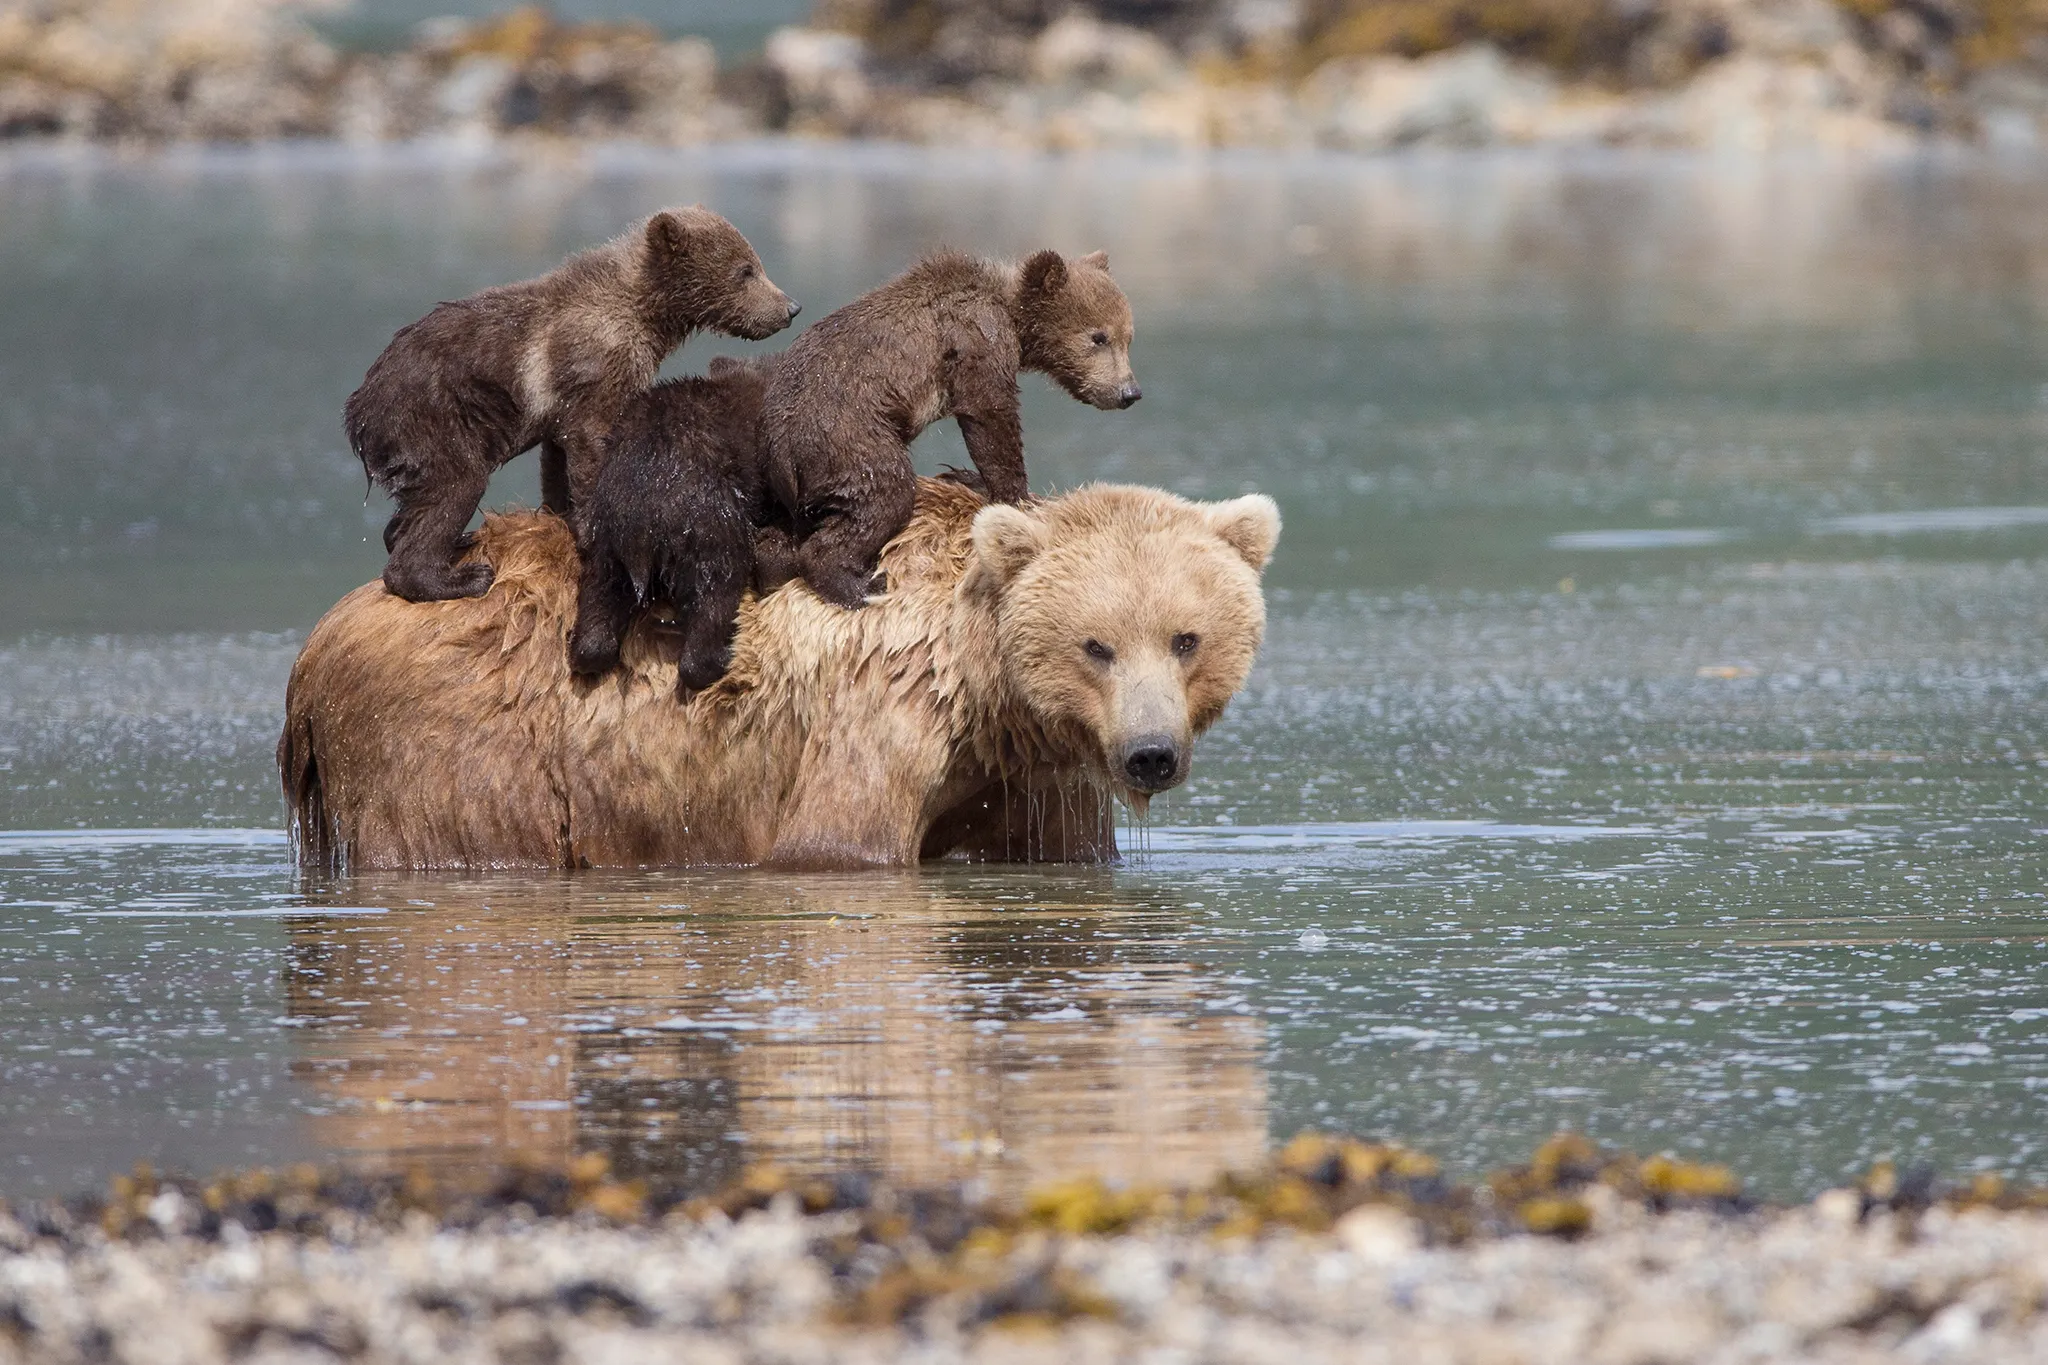 Brown Bear (Ursus arctos) 3-4 month old triplet cubs climbing on mother's back as she cools off in water Katmai National Park, AK. © Suzi Eszterhas